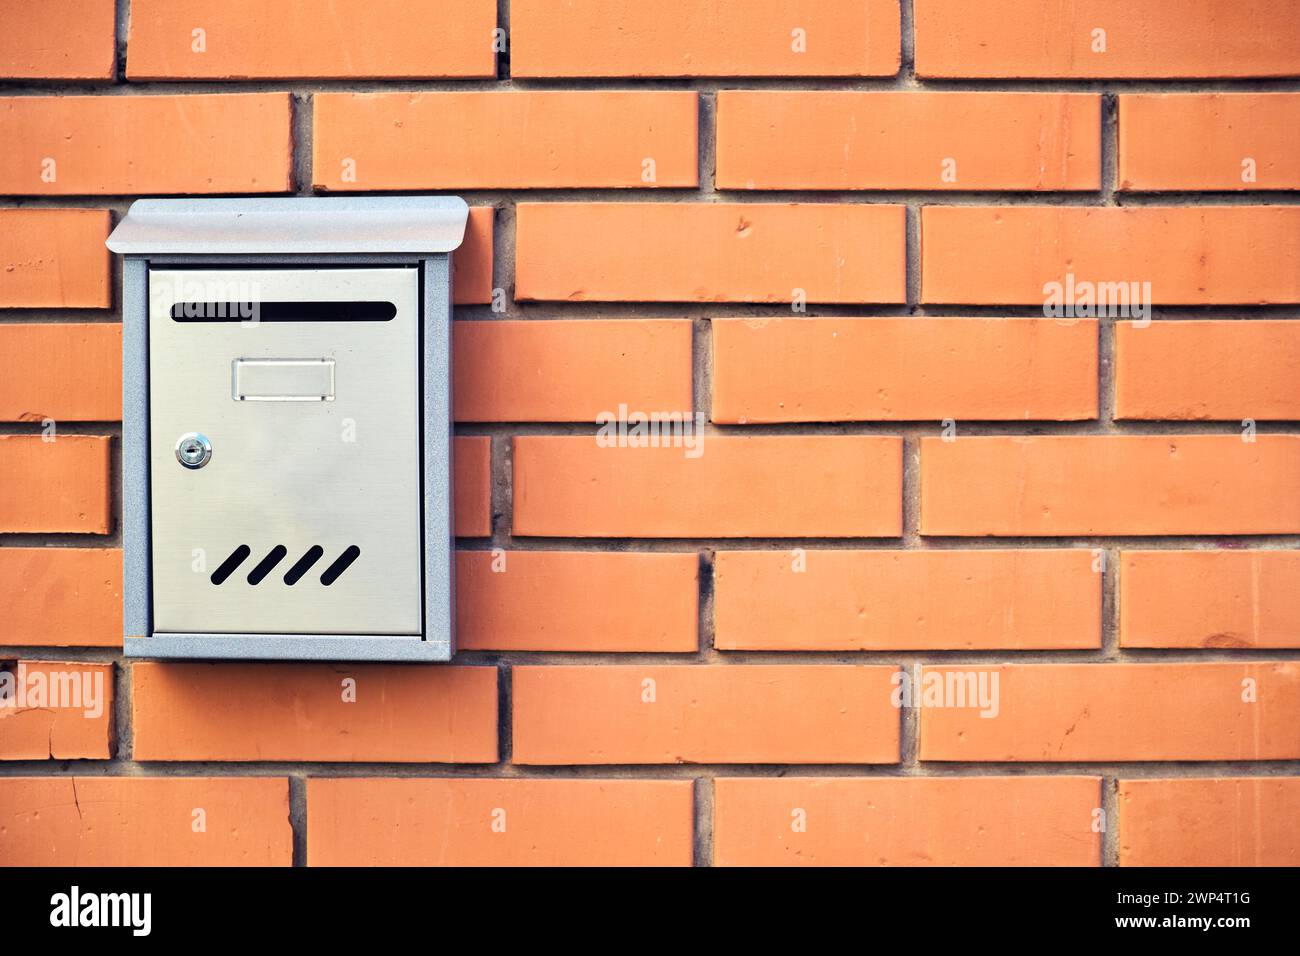 Metallic mailbox mounted on brick wall with copy space Stock Photo